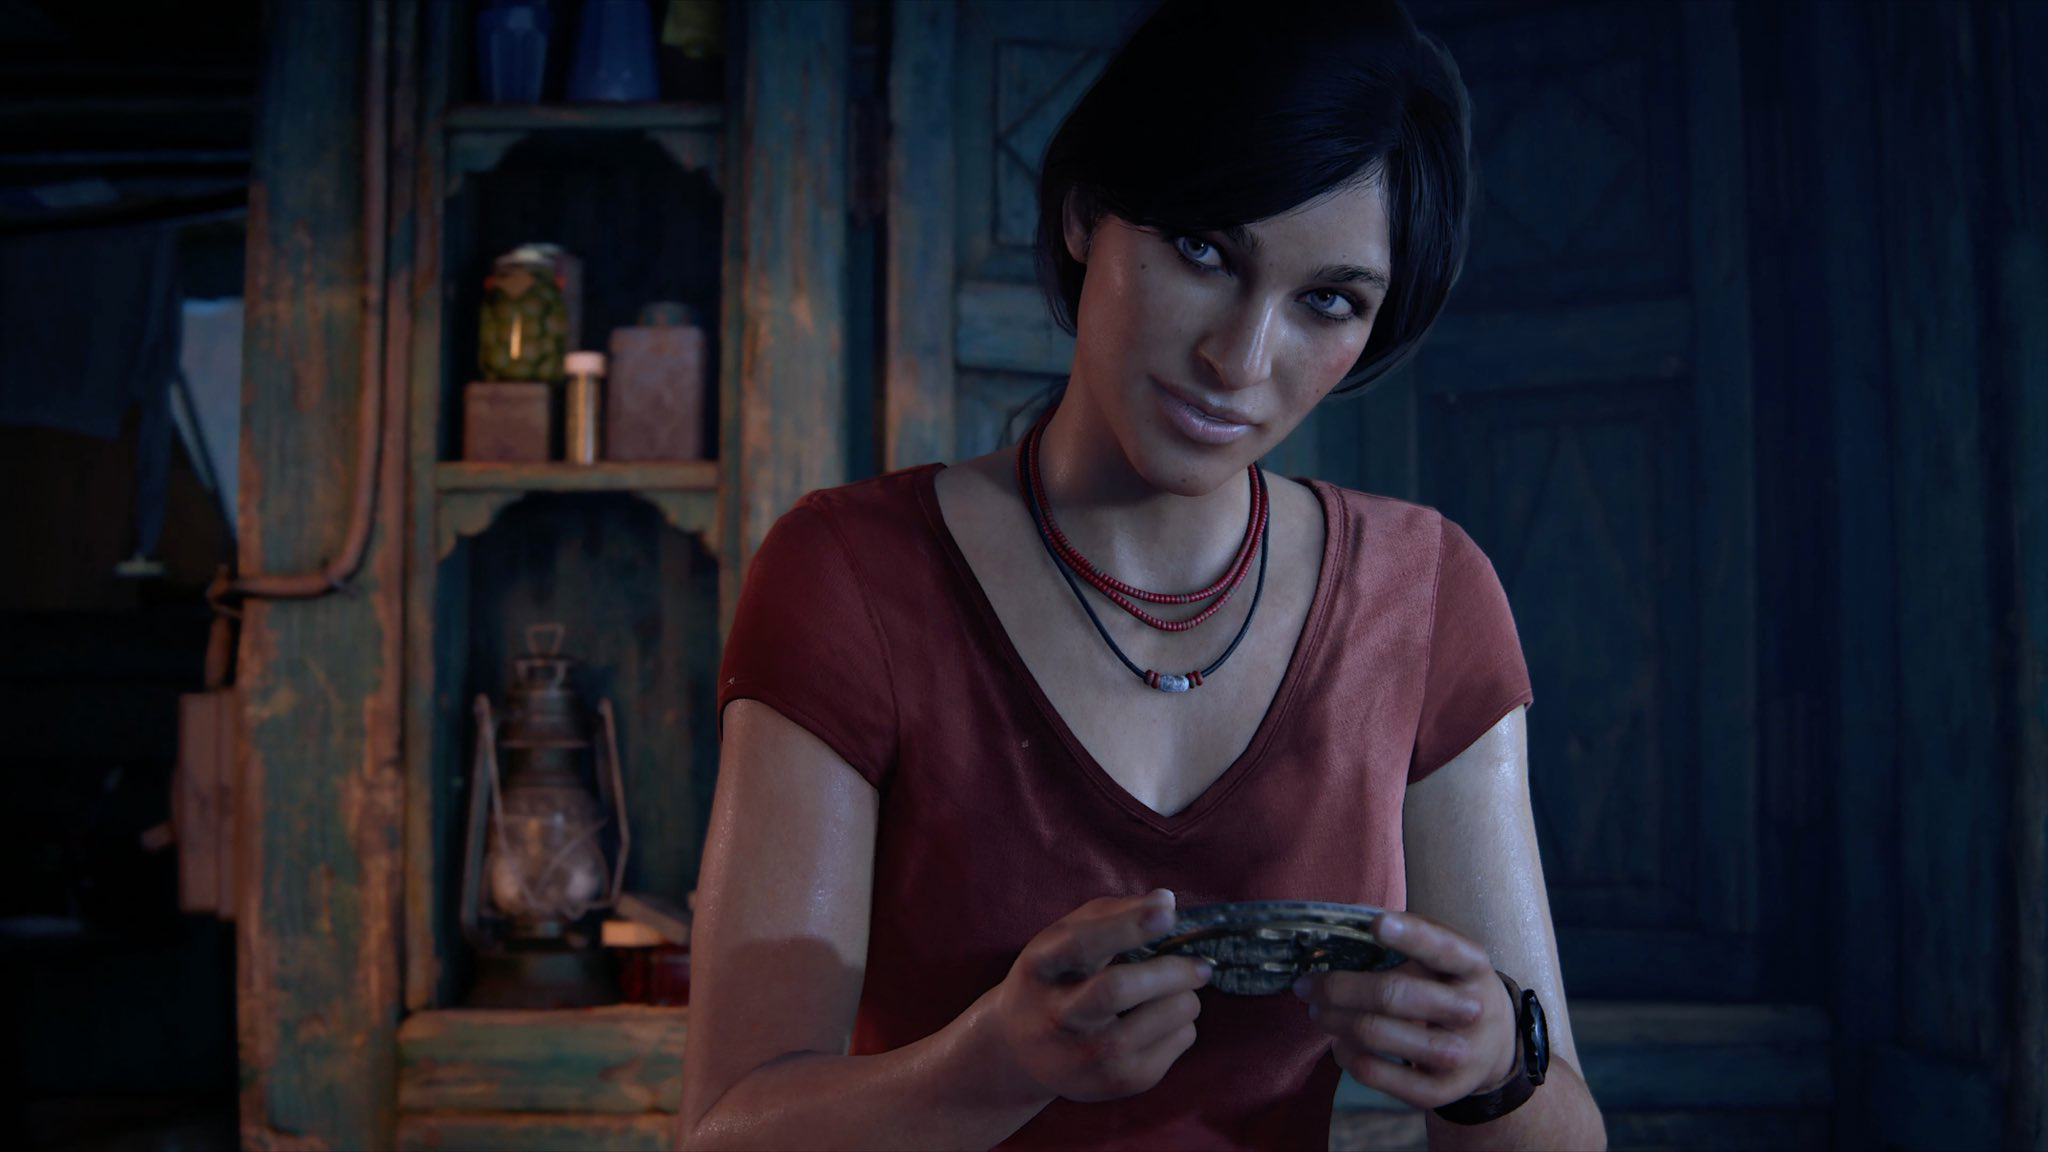 First Look at Uncharted: The Lost Legacy – PlayStation.Blog